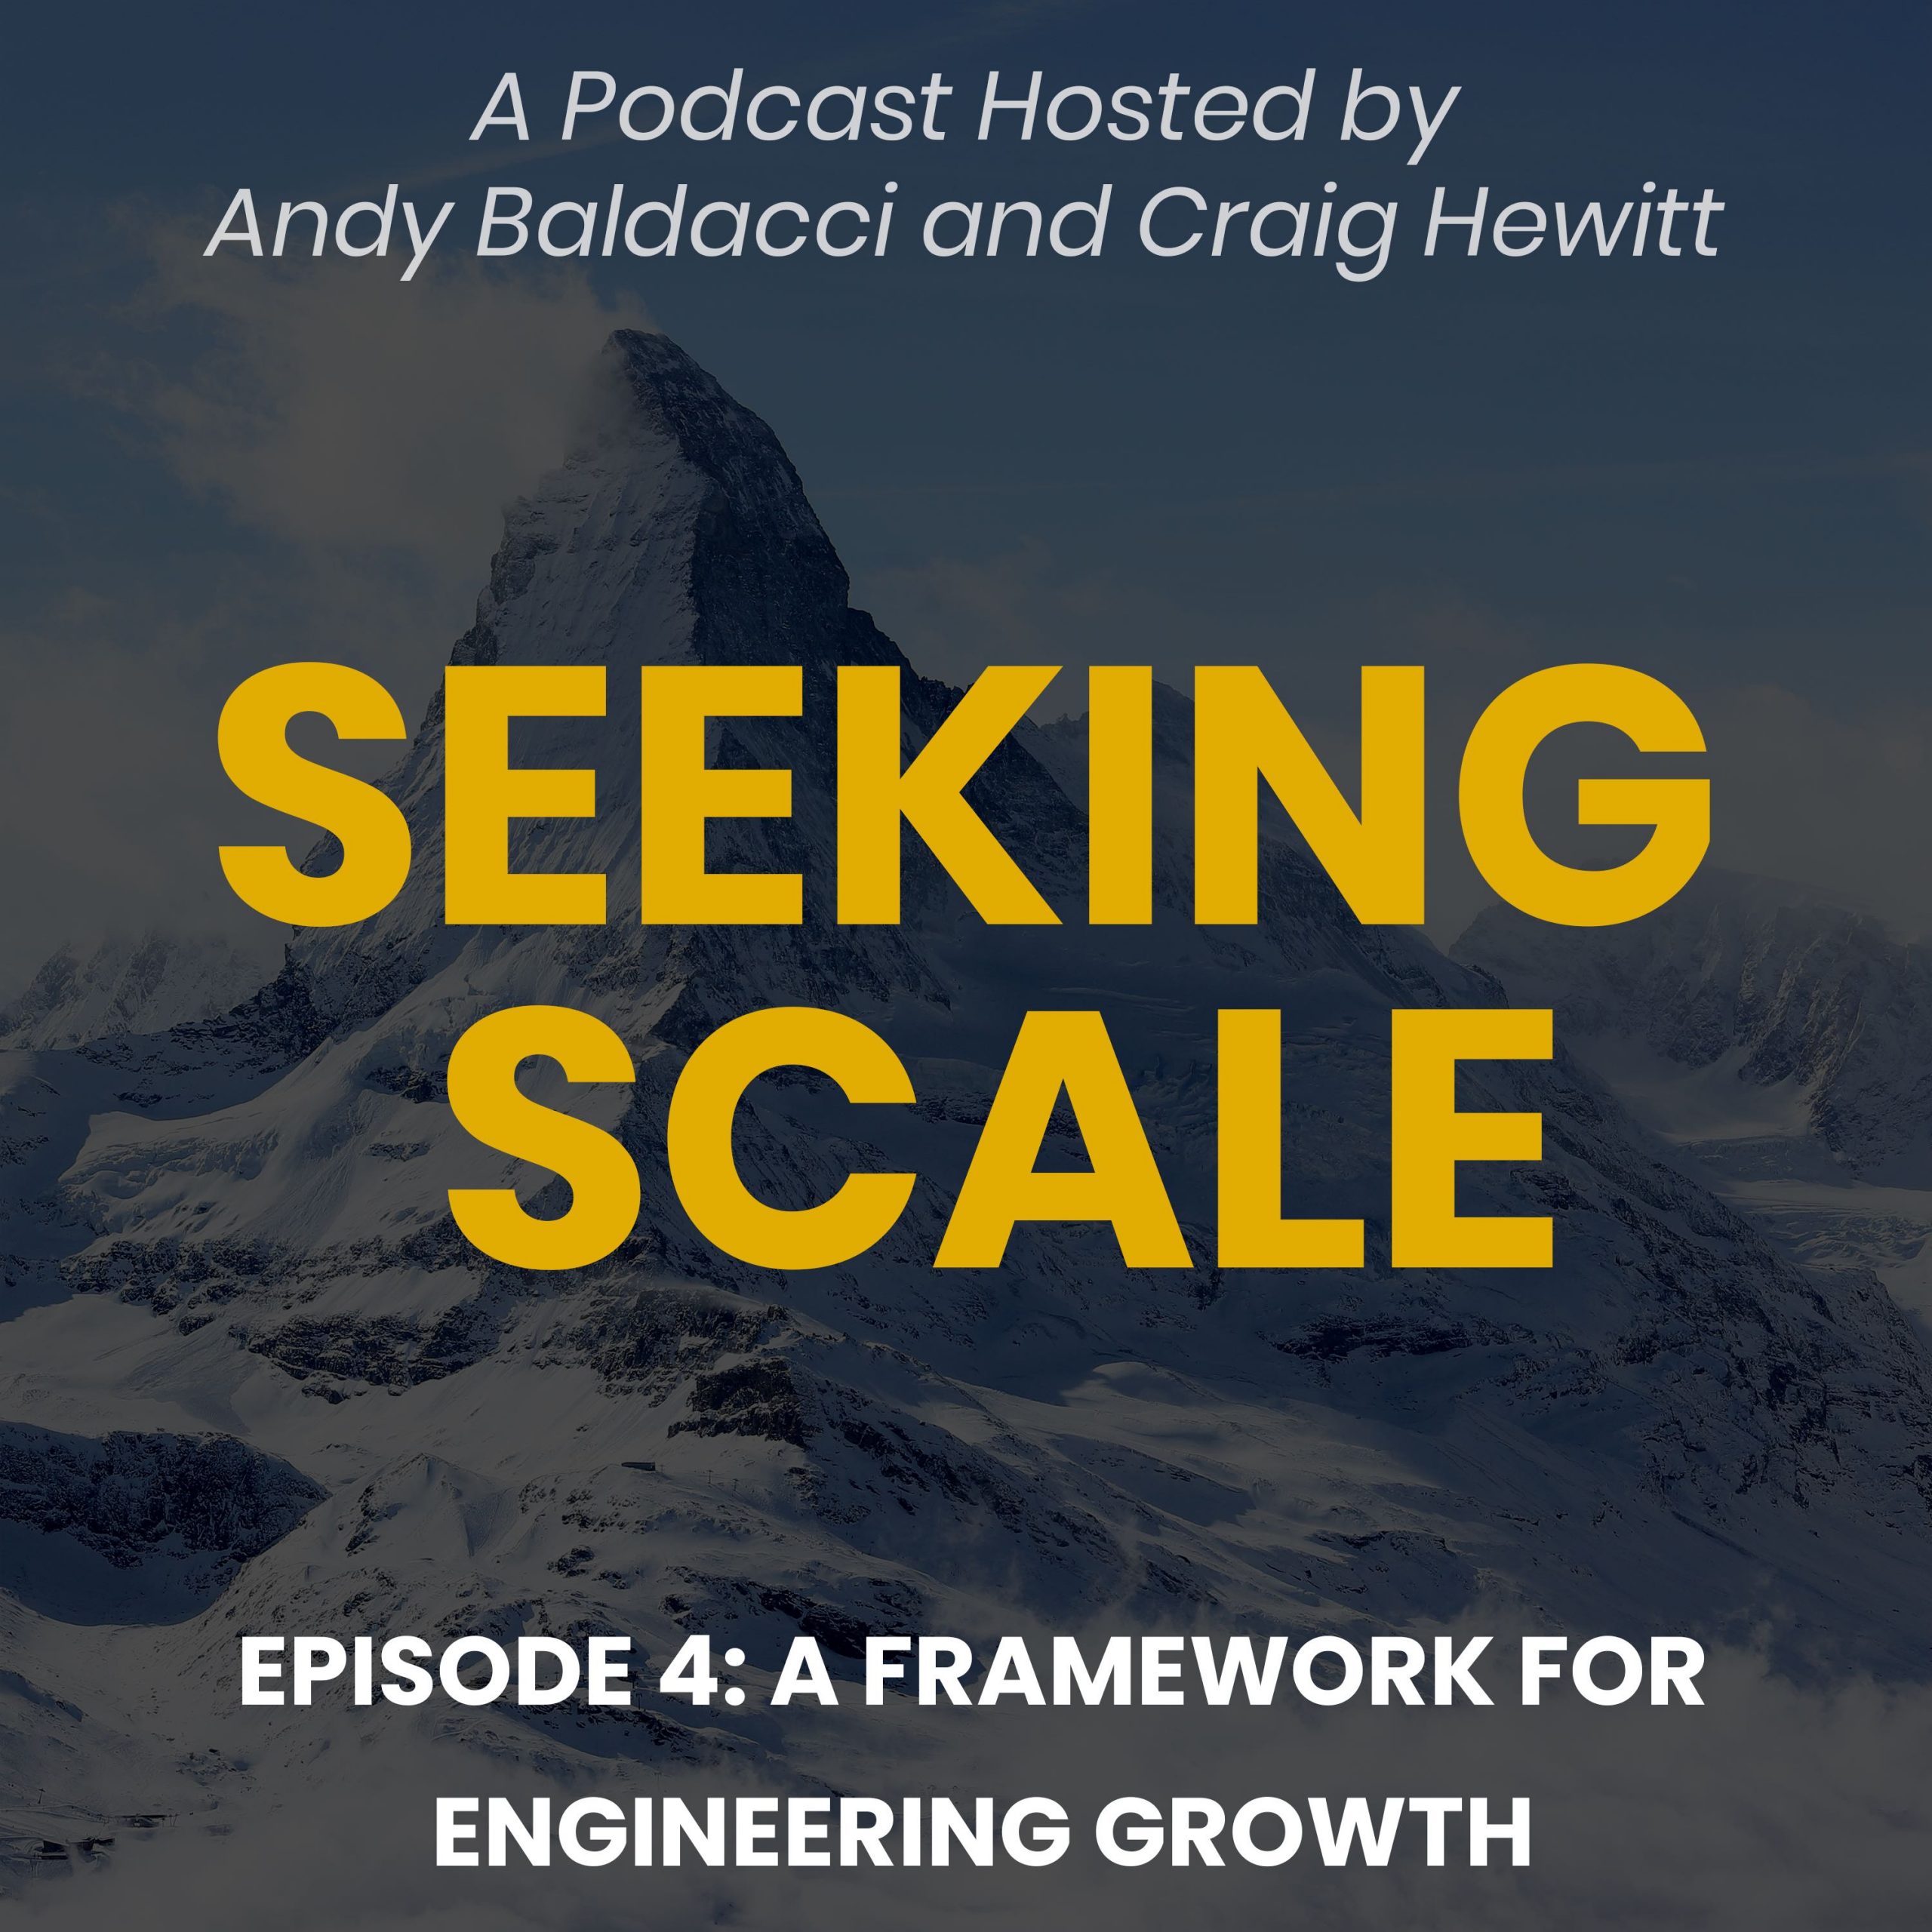 A Framework For Engineering Growth